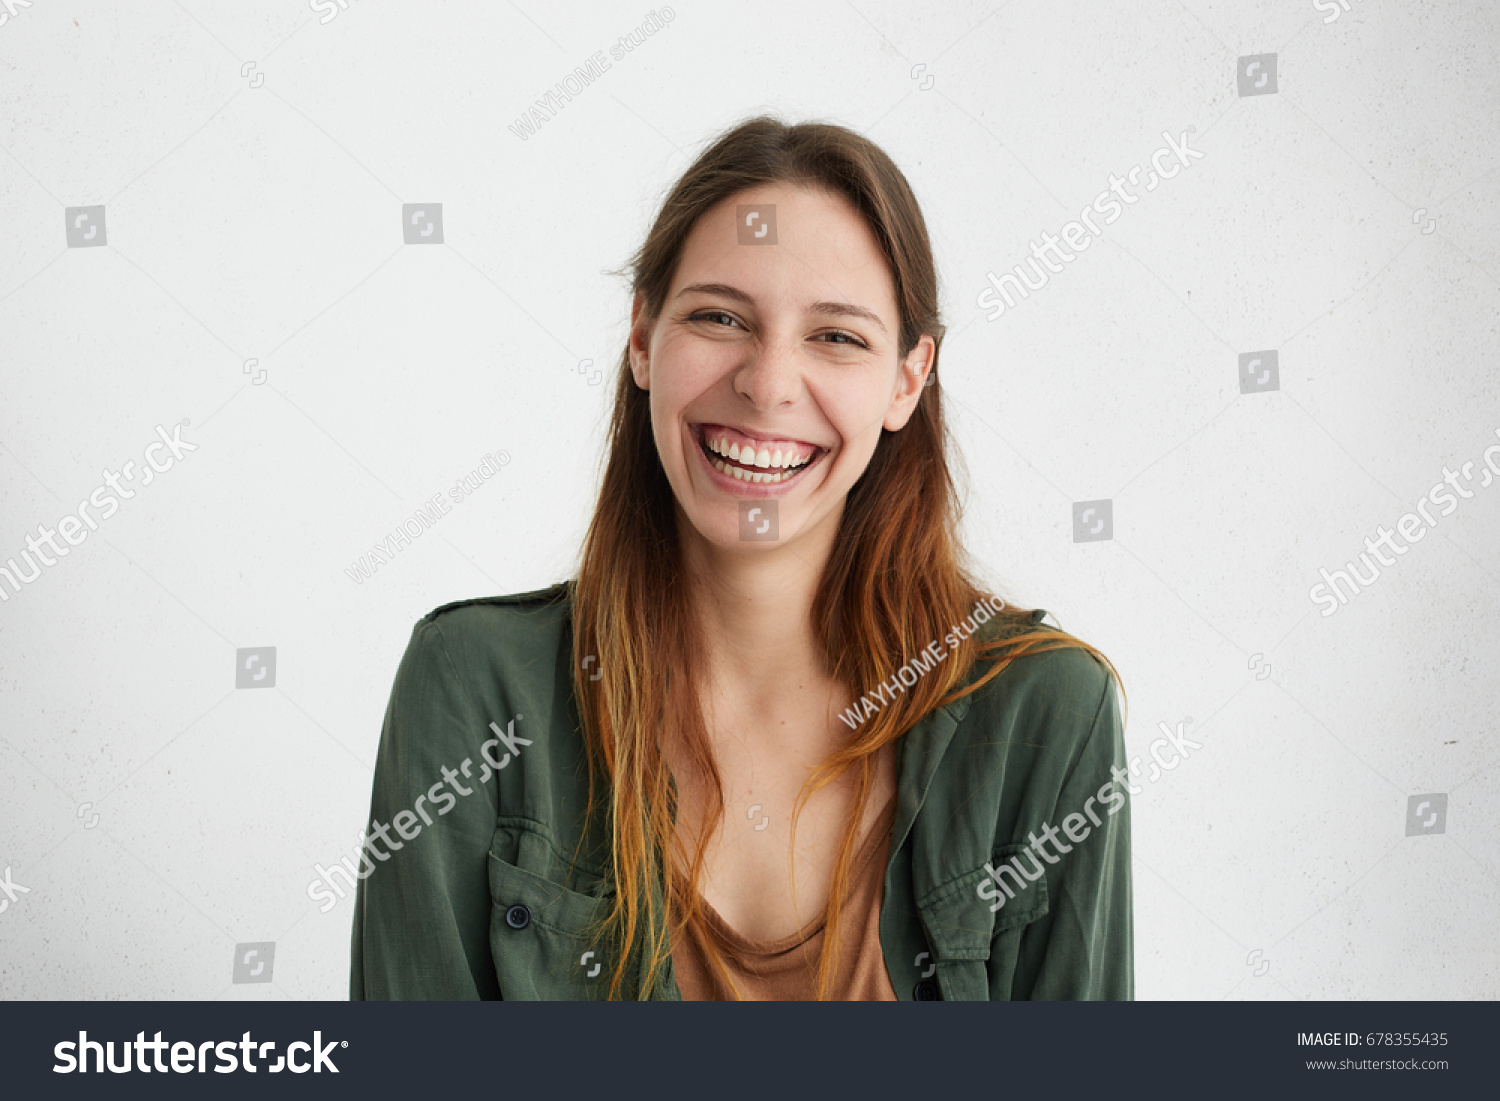 Good-looking female with sincere smile rejoicing her success at work having good mood showing her positive emotions. Woman with gentle smile. People, happiness, facial expressions and emotions #678355435